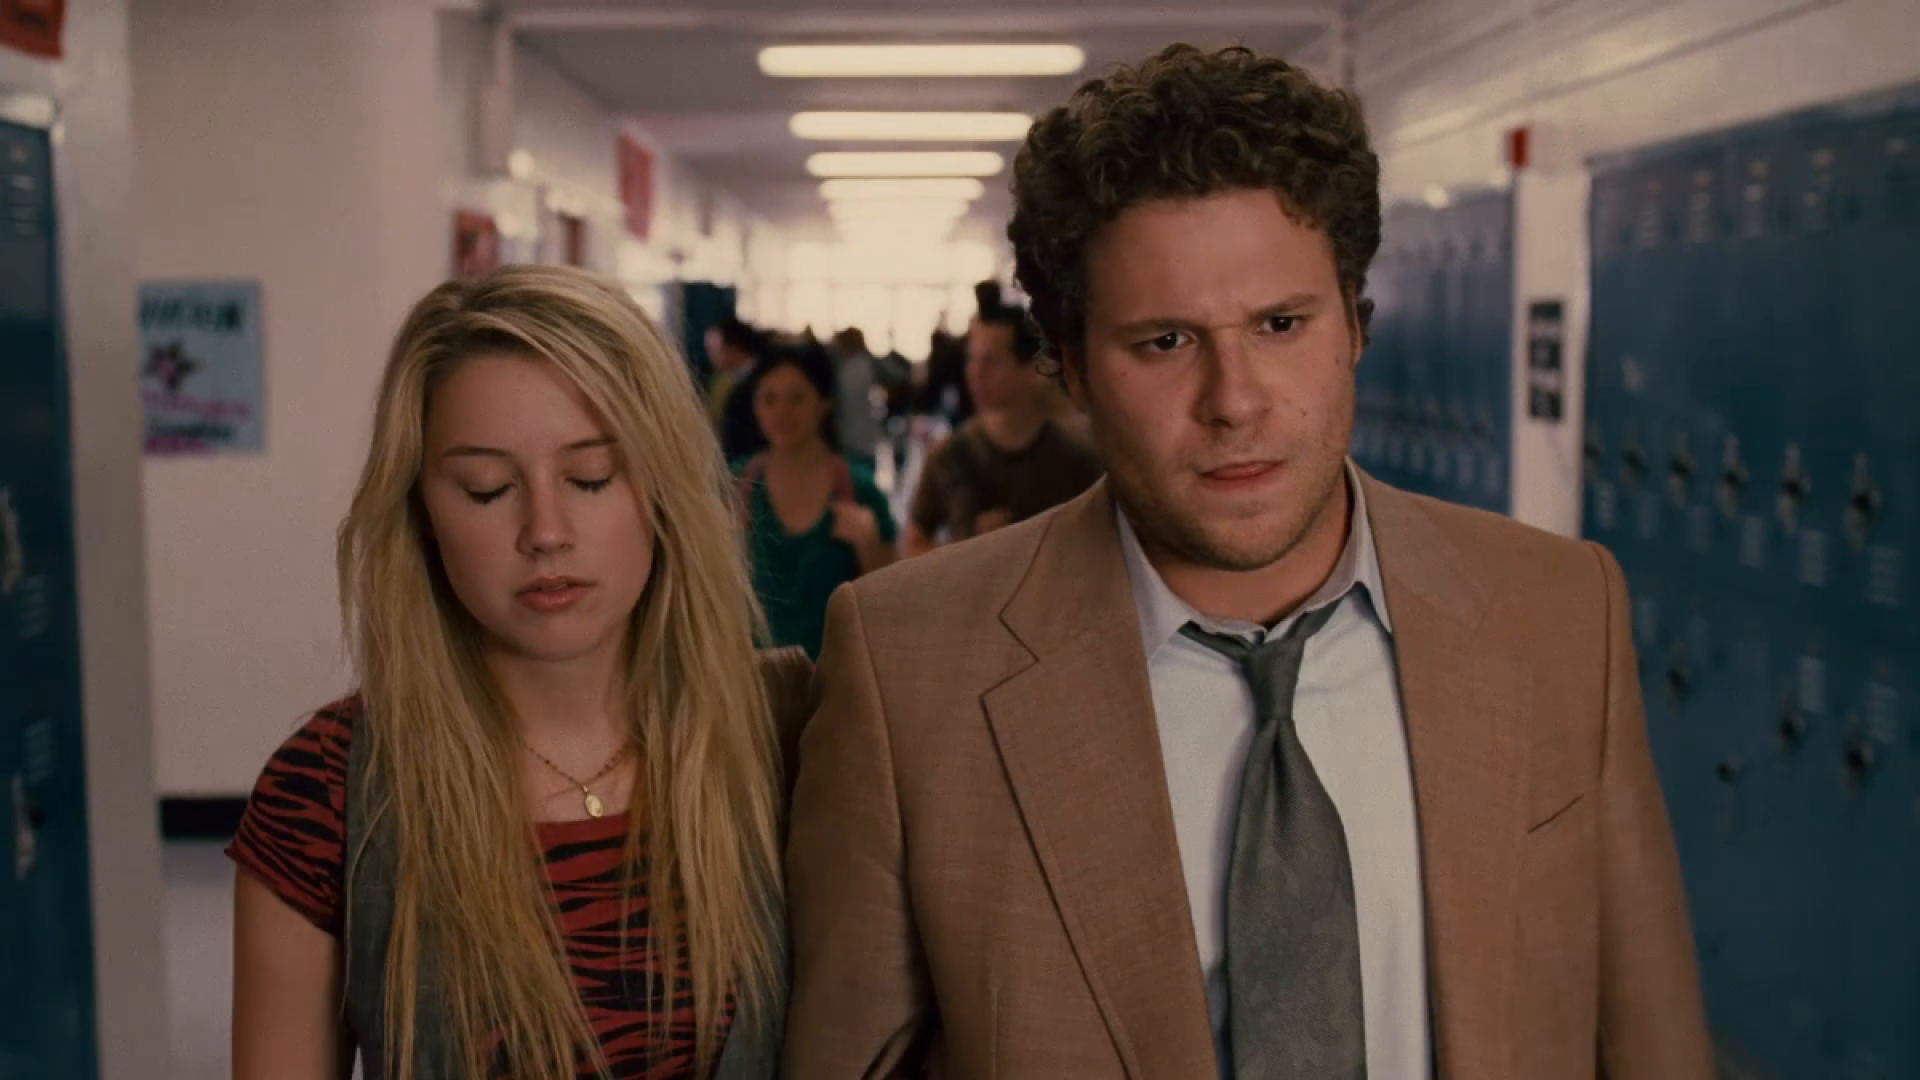 Seth Rogen and Amber Heard in Pineapple Express